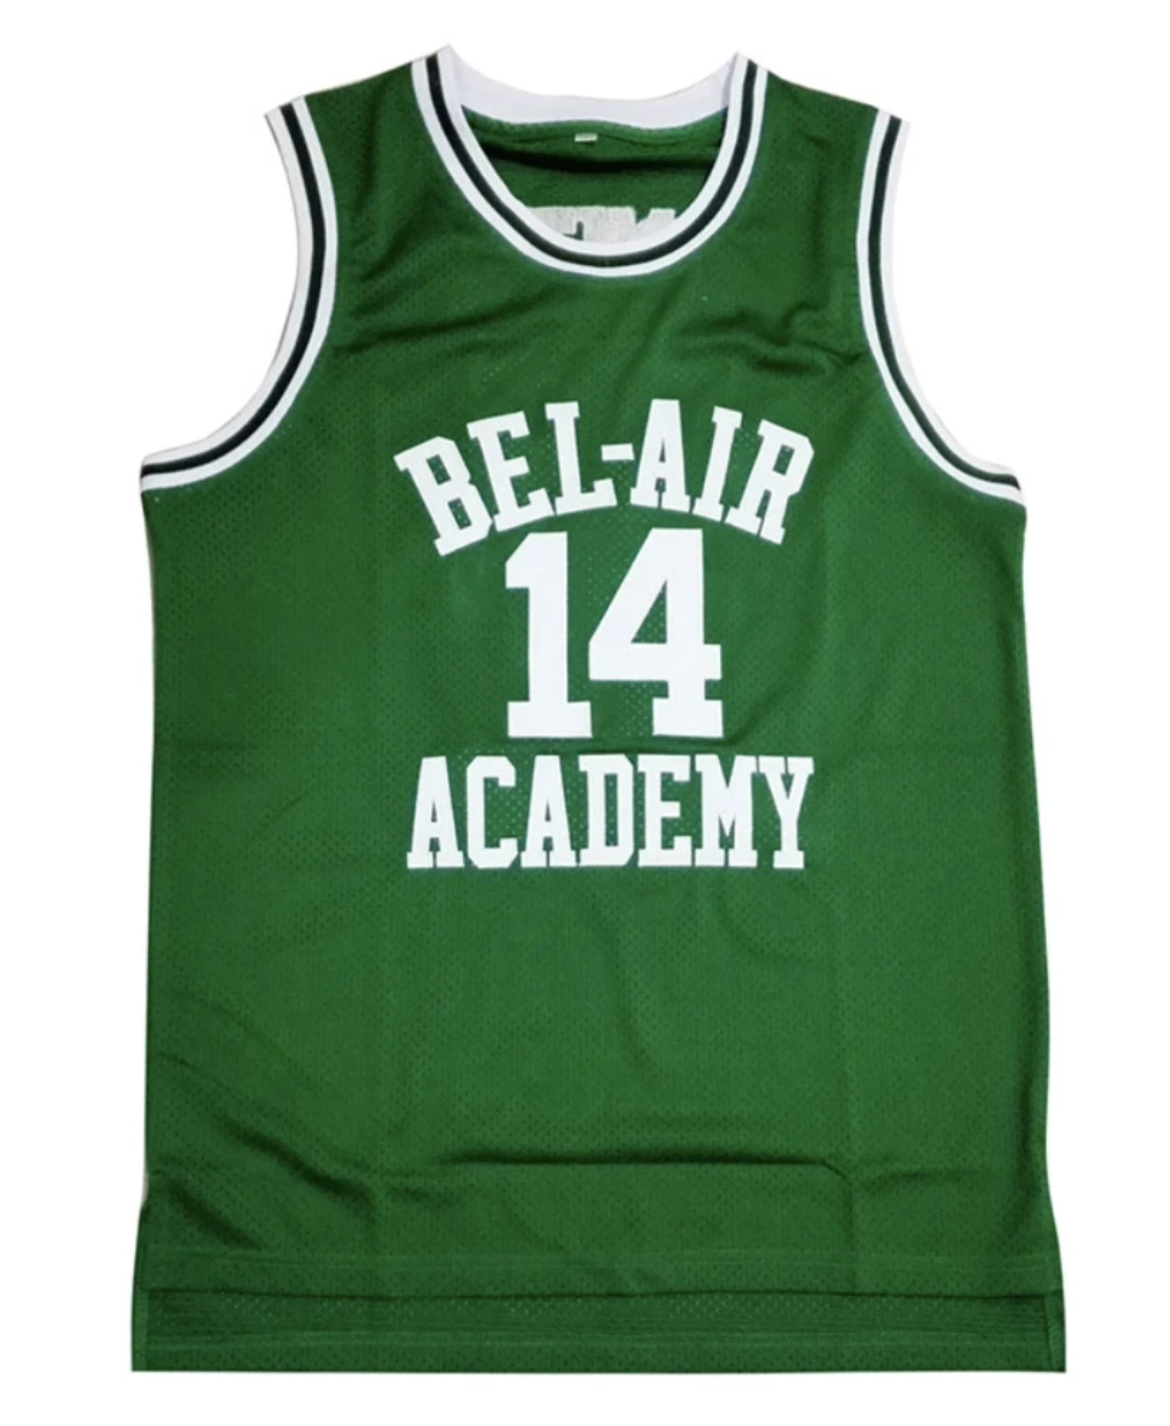 Will Smith X Bel Air Jersey (Green)